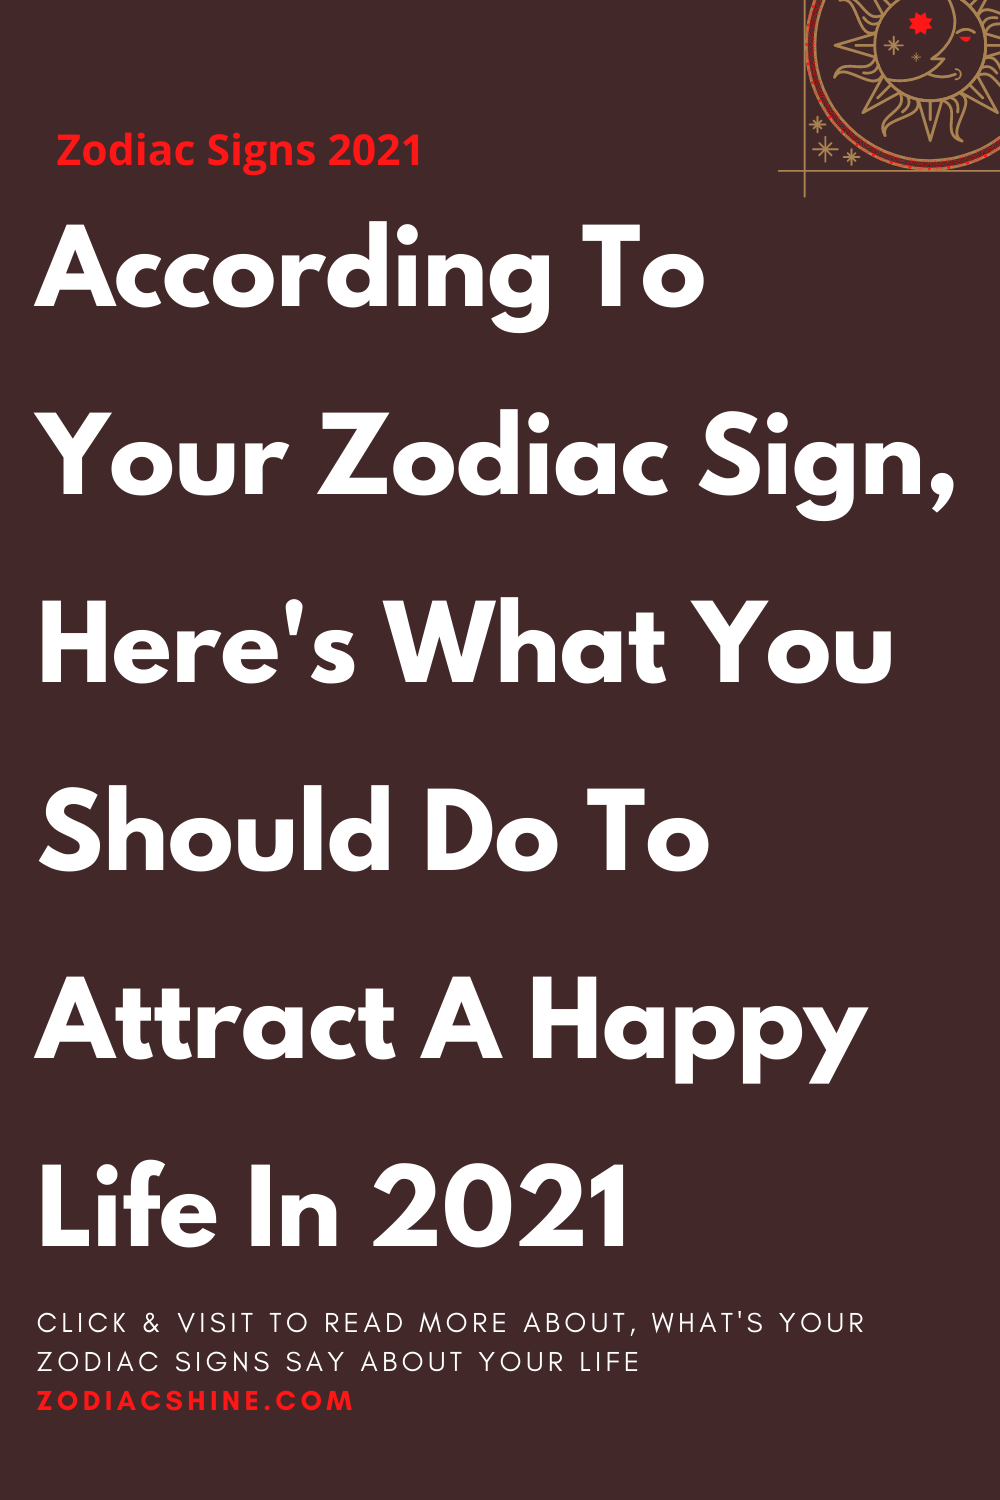 According To Your Zodiac Sign, Here's What You Should Do To Attract A Happy Life In 2021